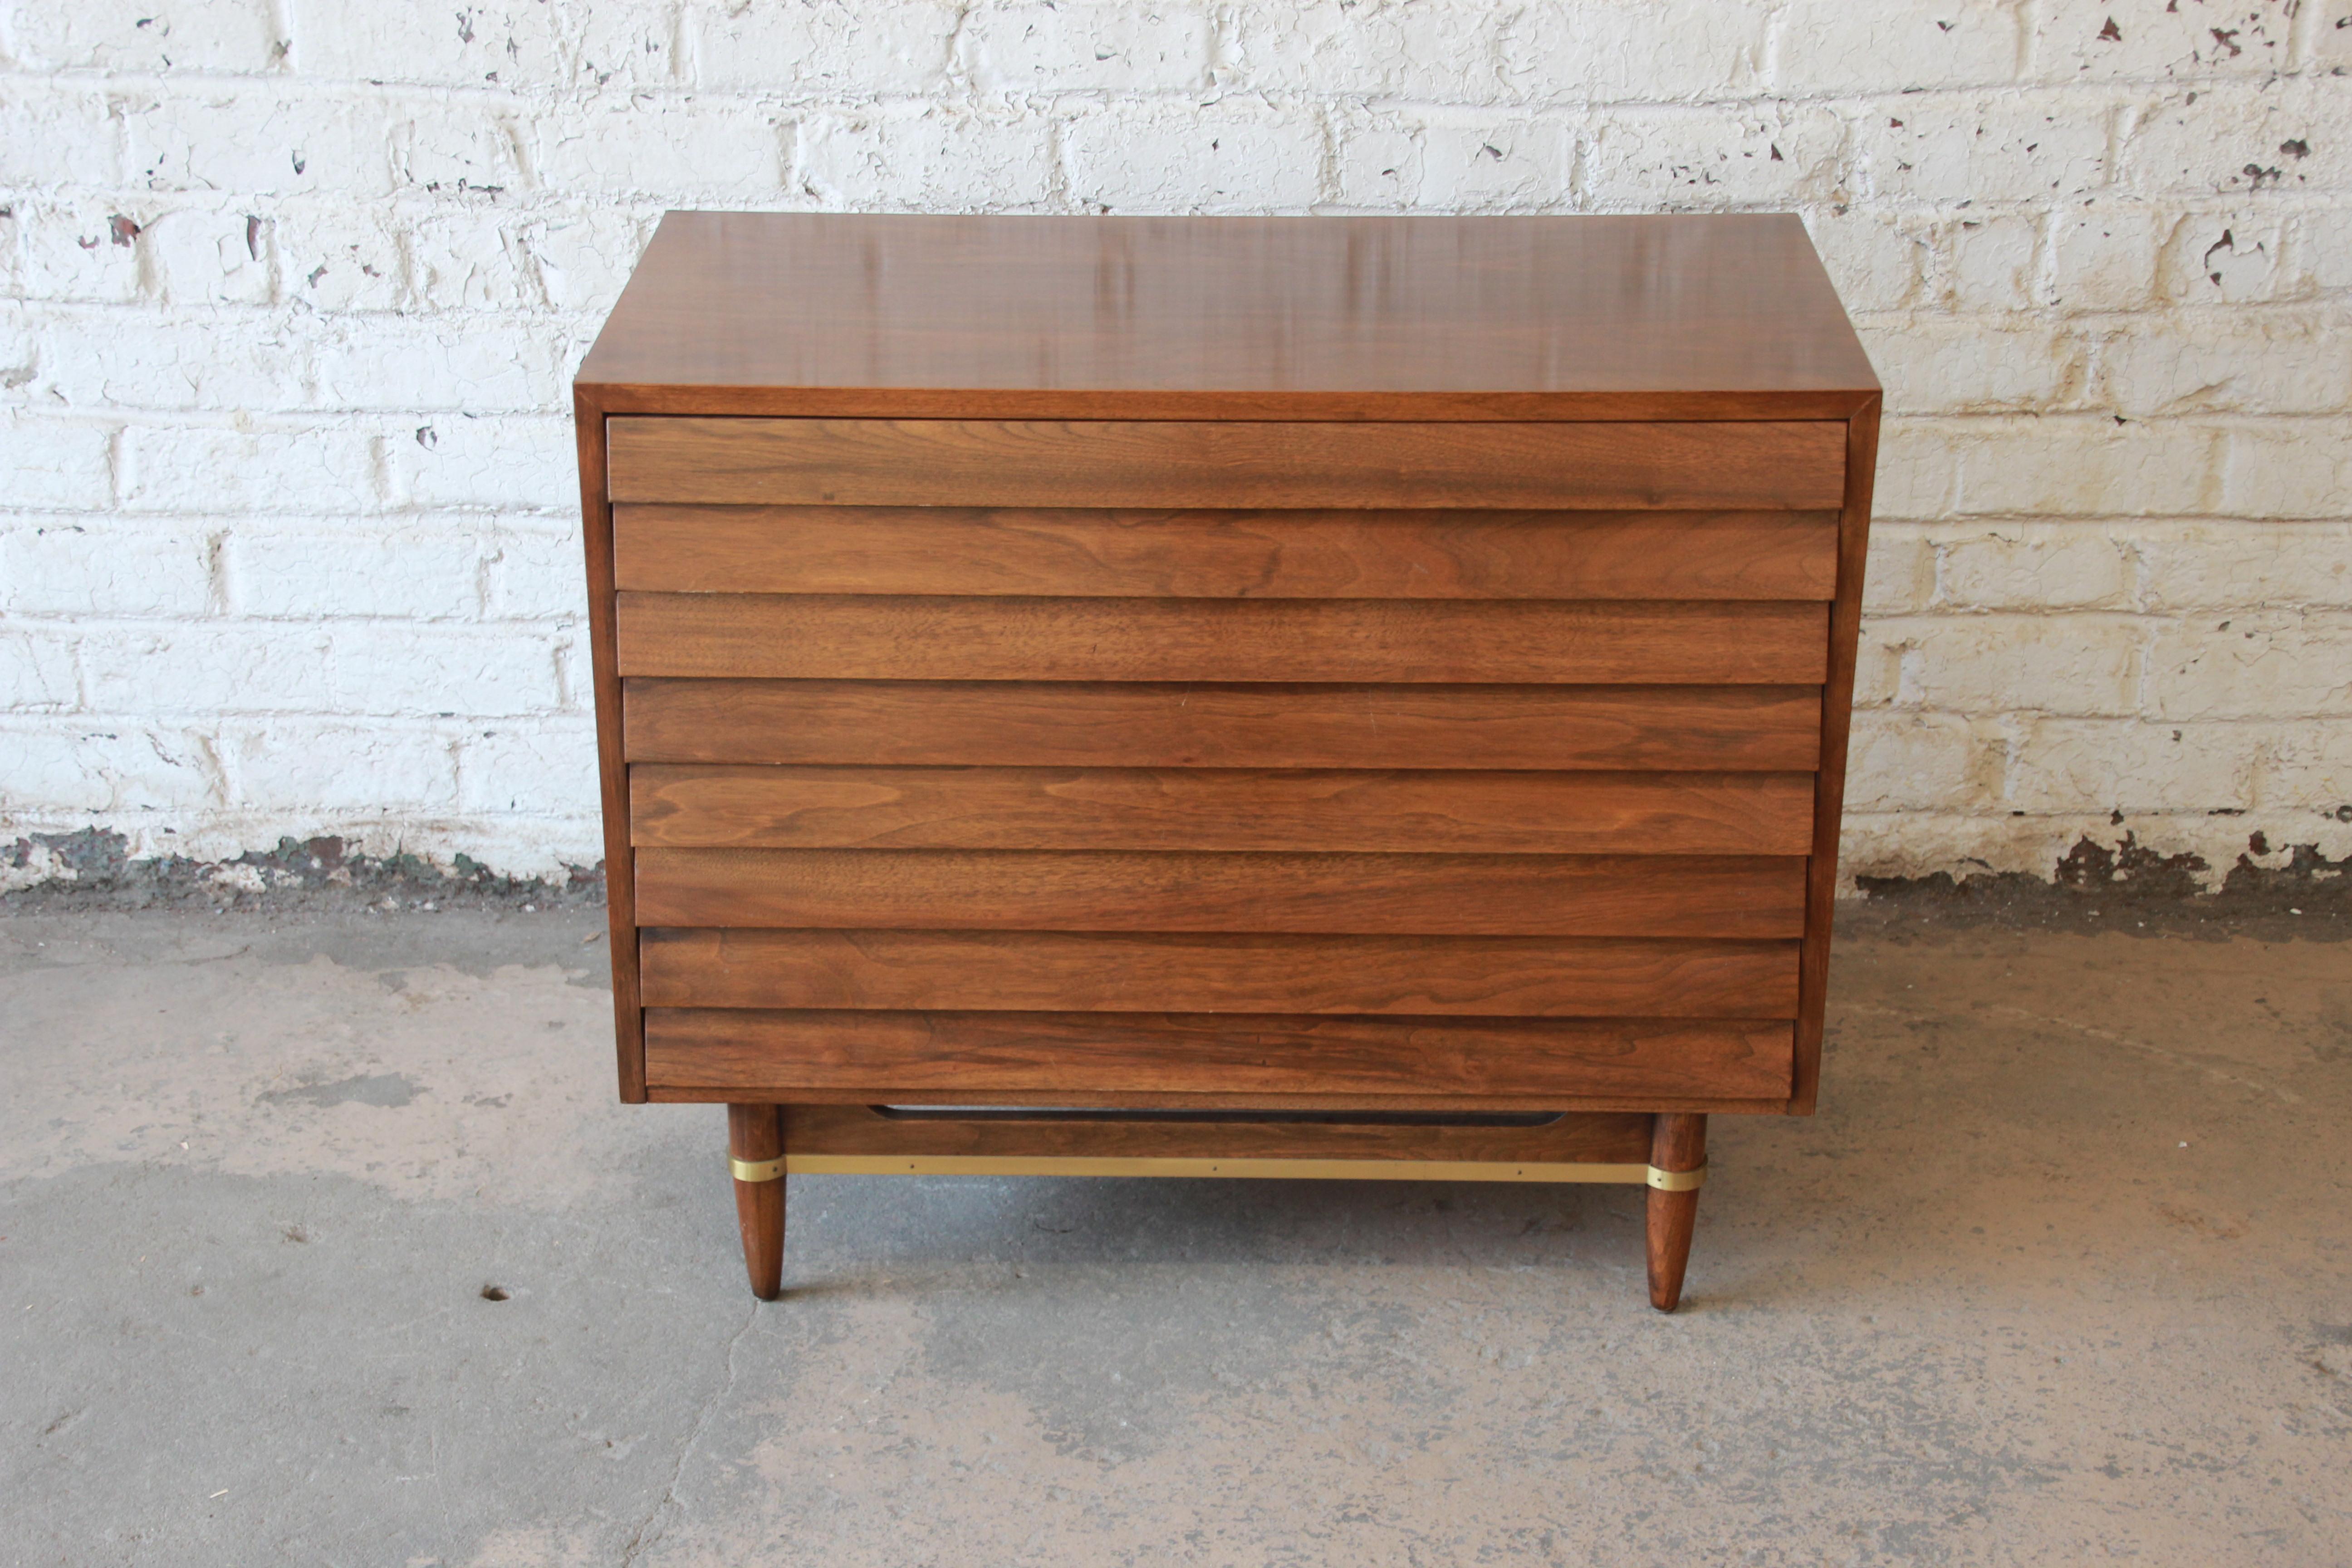 Offering a very nice Merton Gershun for American of Martinsville small dresser chest or server. The chest has a nice louvered front with three drawers that open and close smoothly. The chest can be used as a server or dresser by taking out the